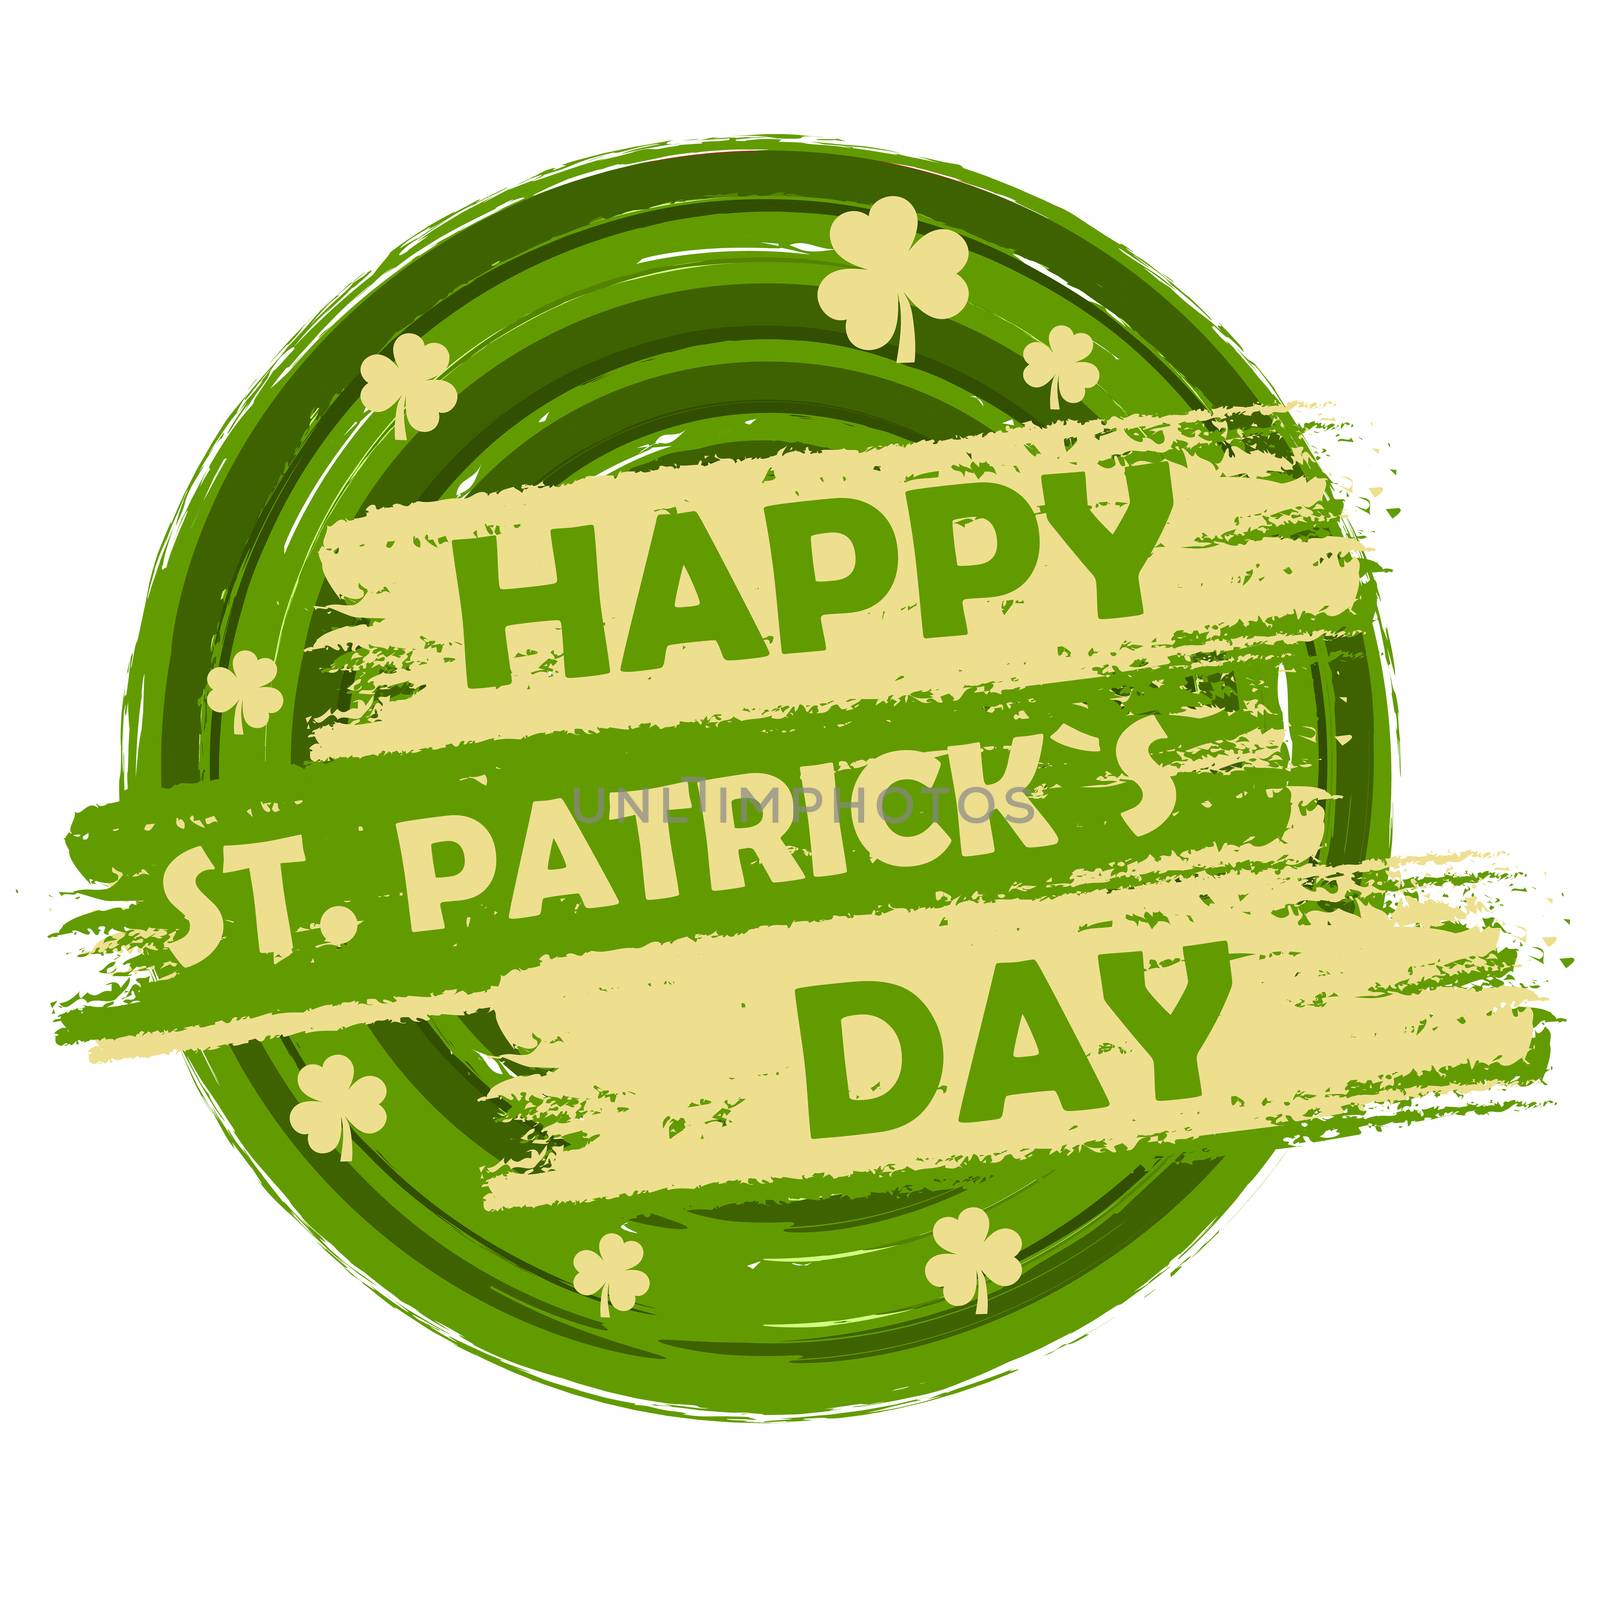 happy St. Patrick's day with shamrock signs, green round drawn b by marinini